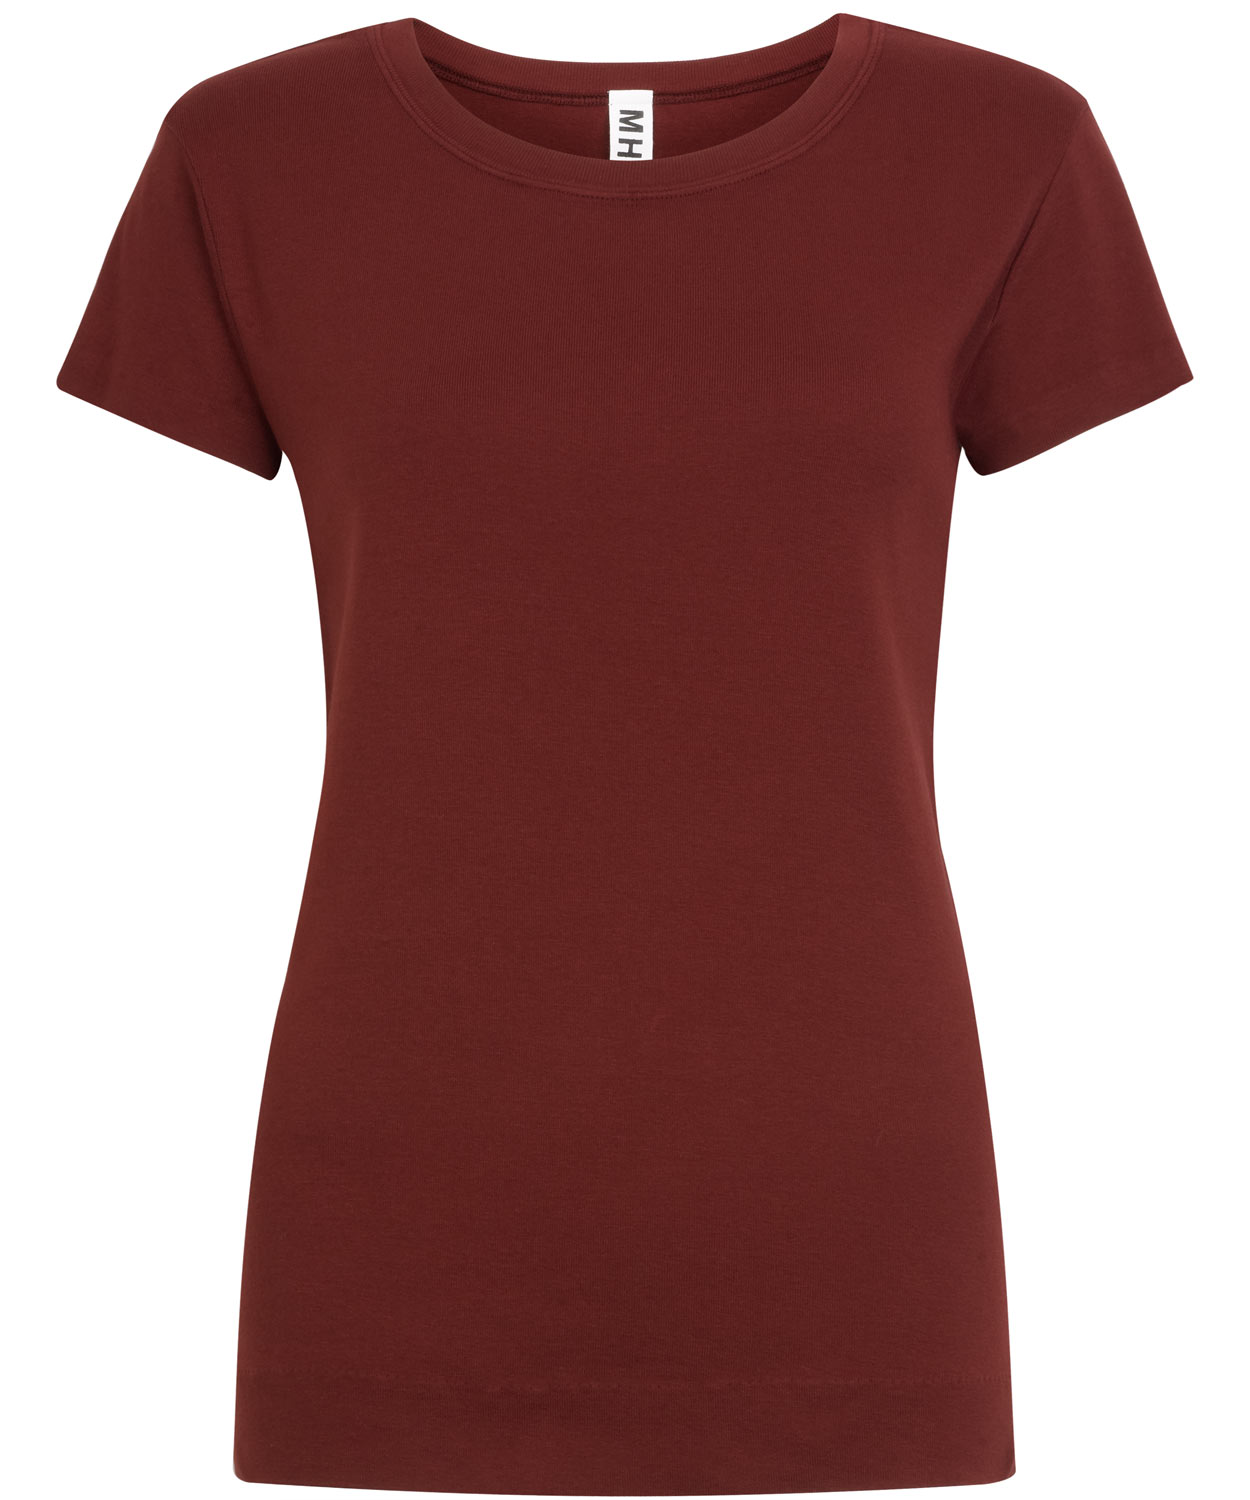 Mhl by margaret howell Burgundy Gym T-shirt in Red | Lyst